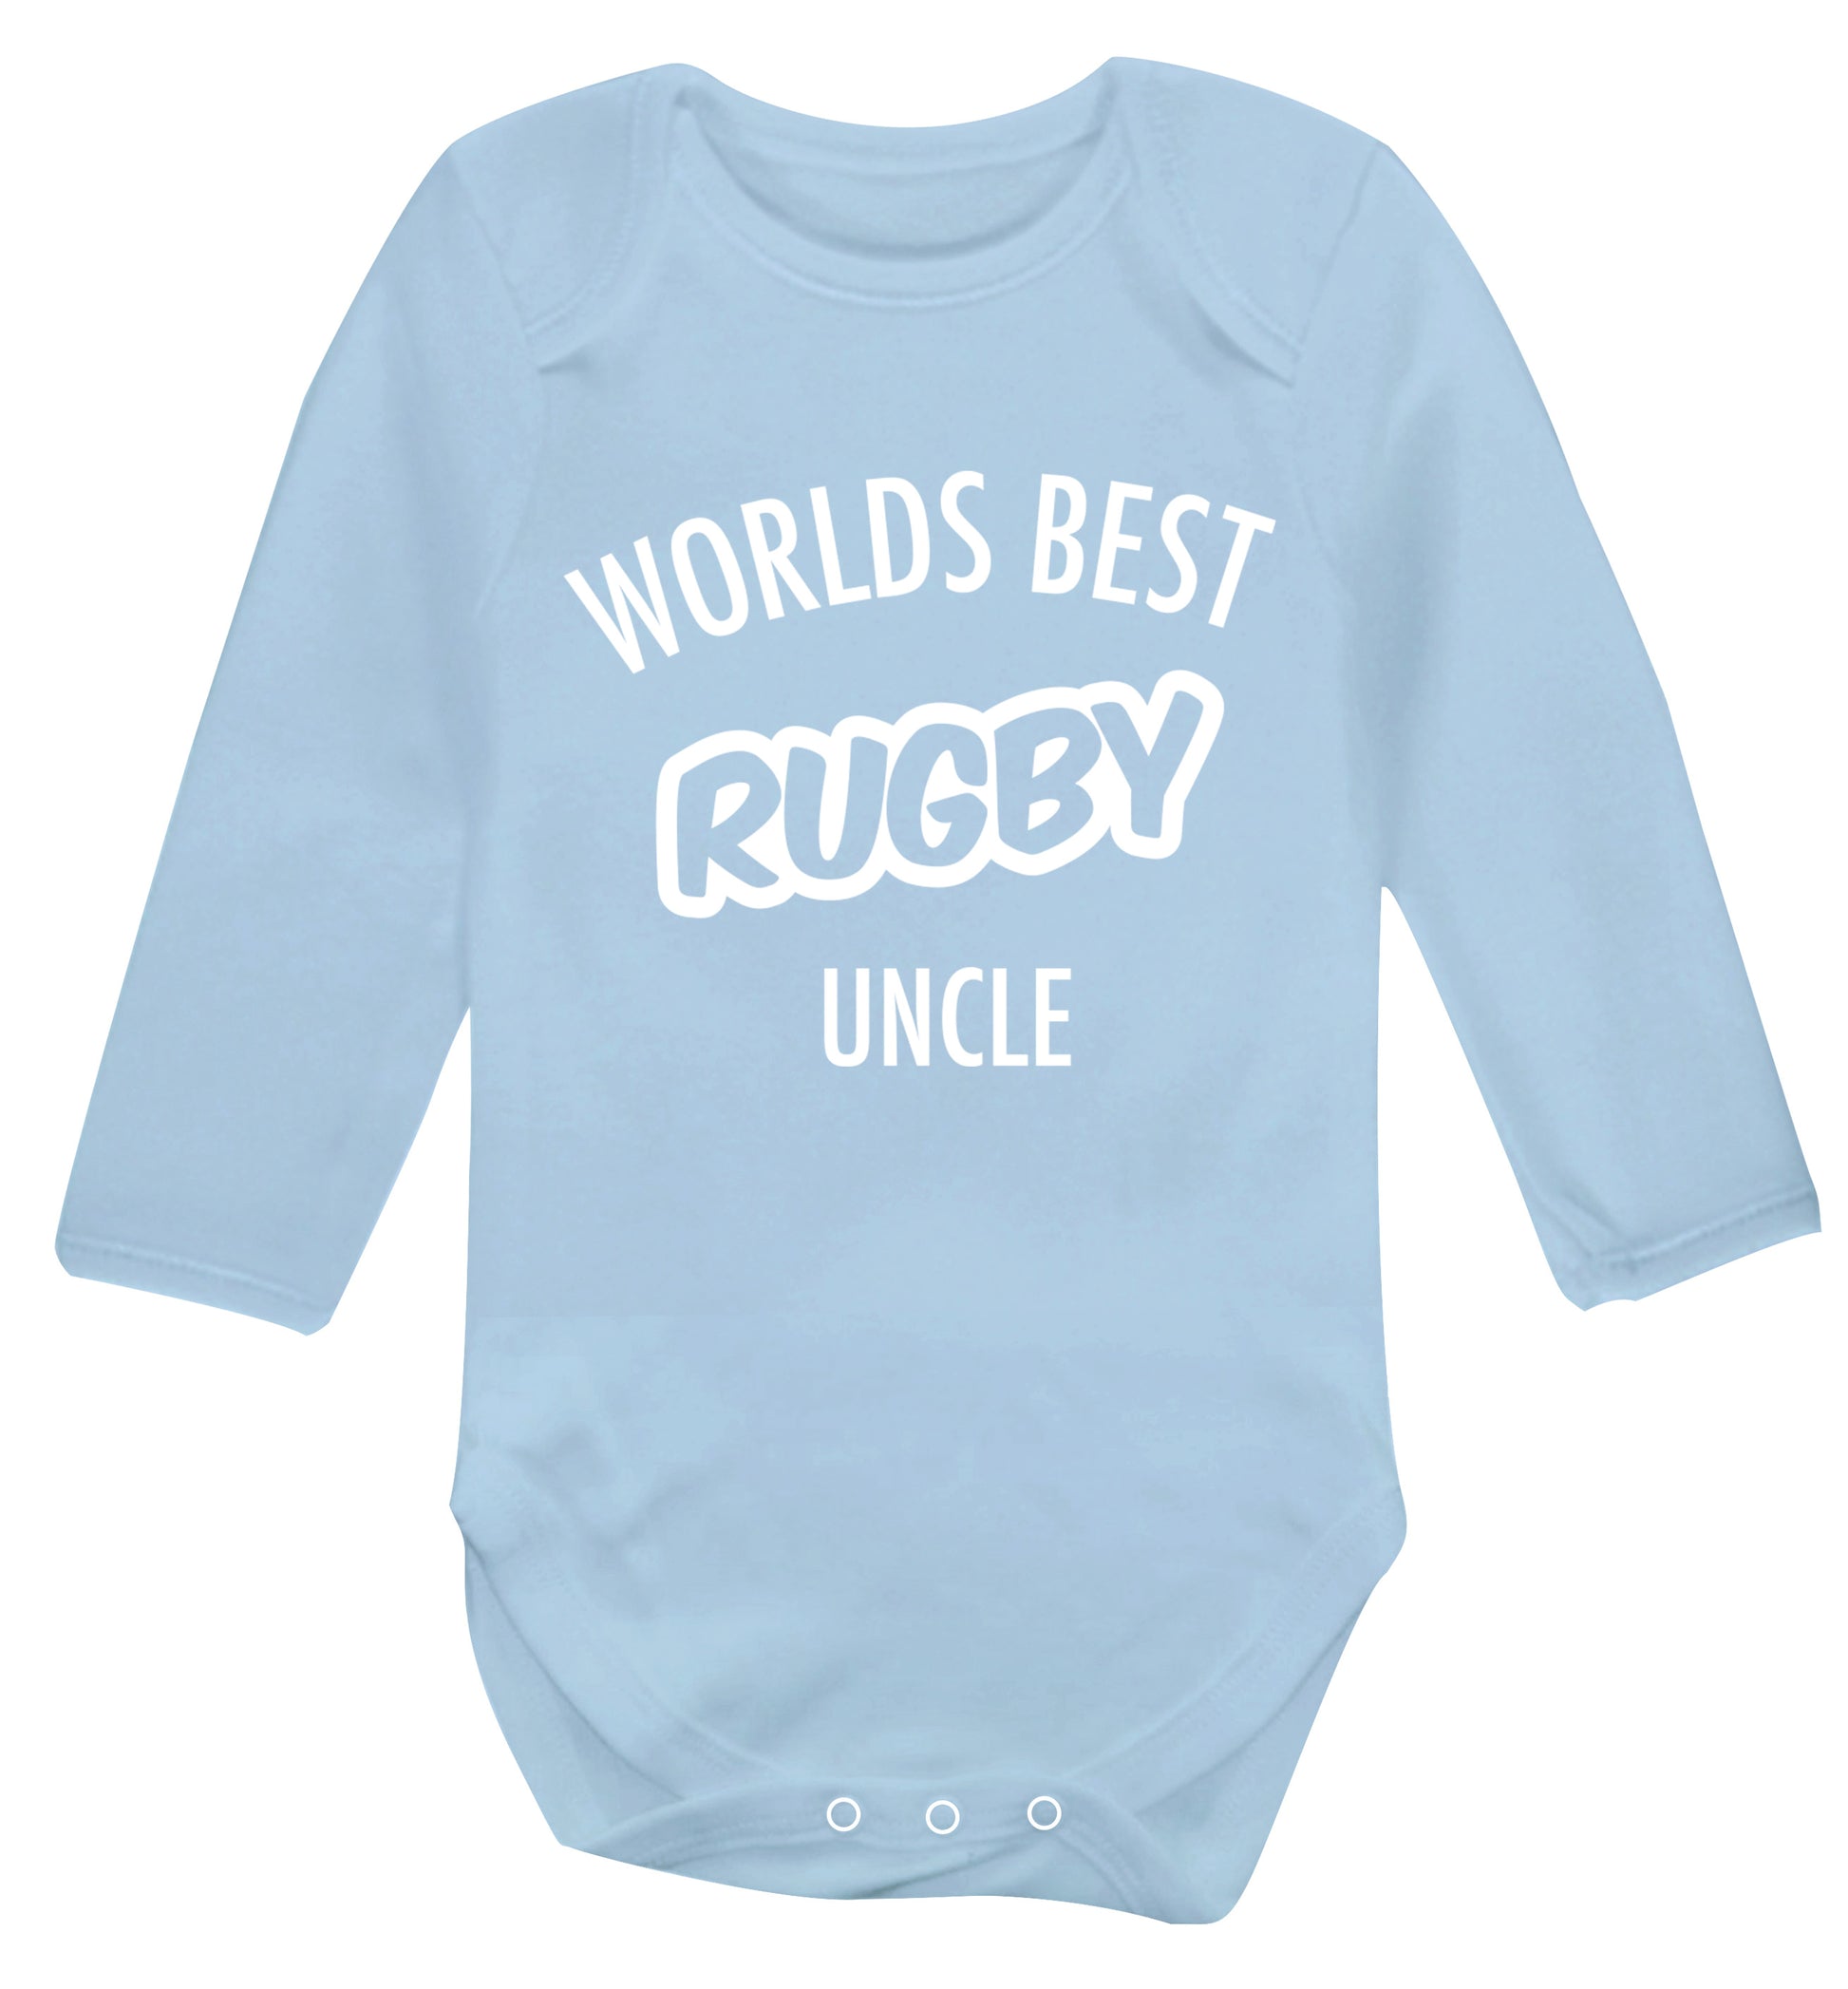 Worlds best rugby uncle Baby Vest long sleeved pale blue 6-12 months